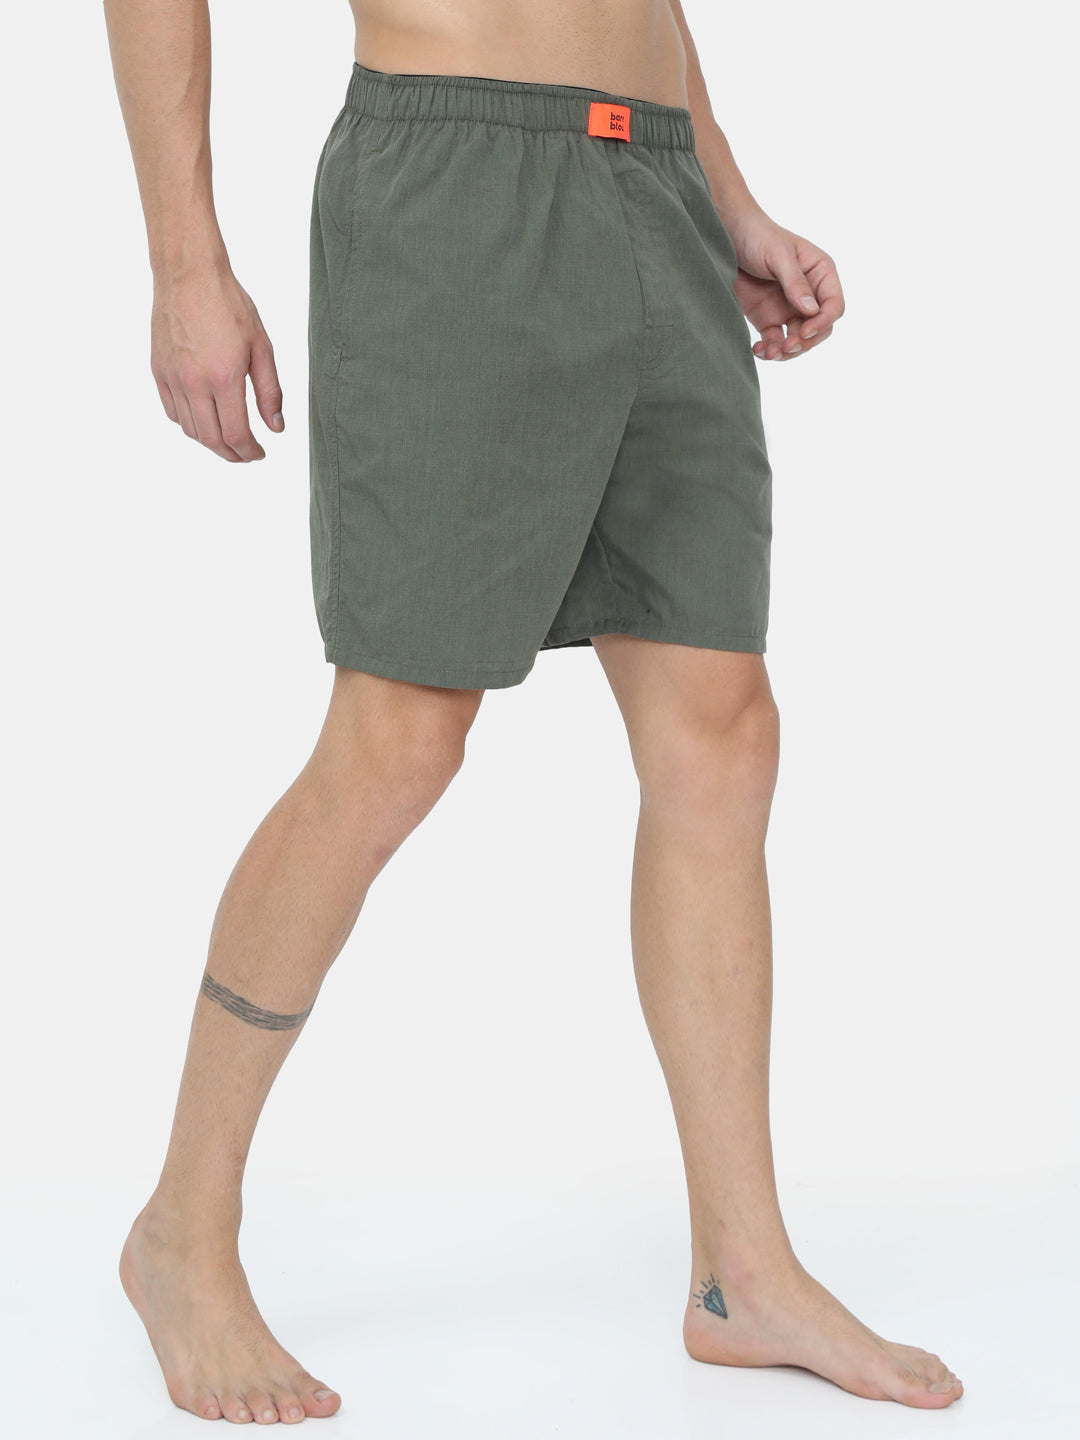 The Olive Green Boxer